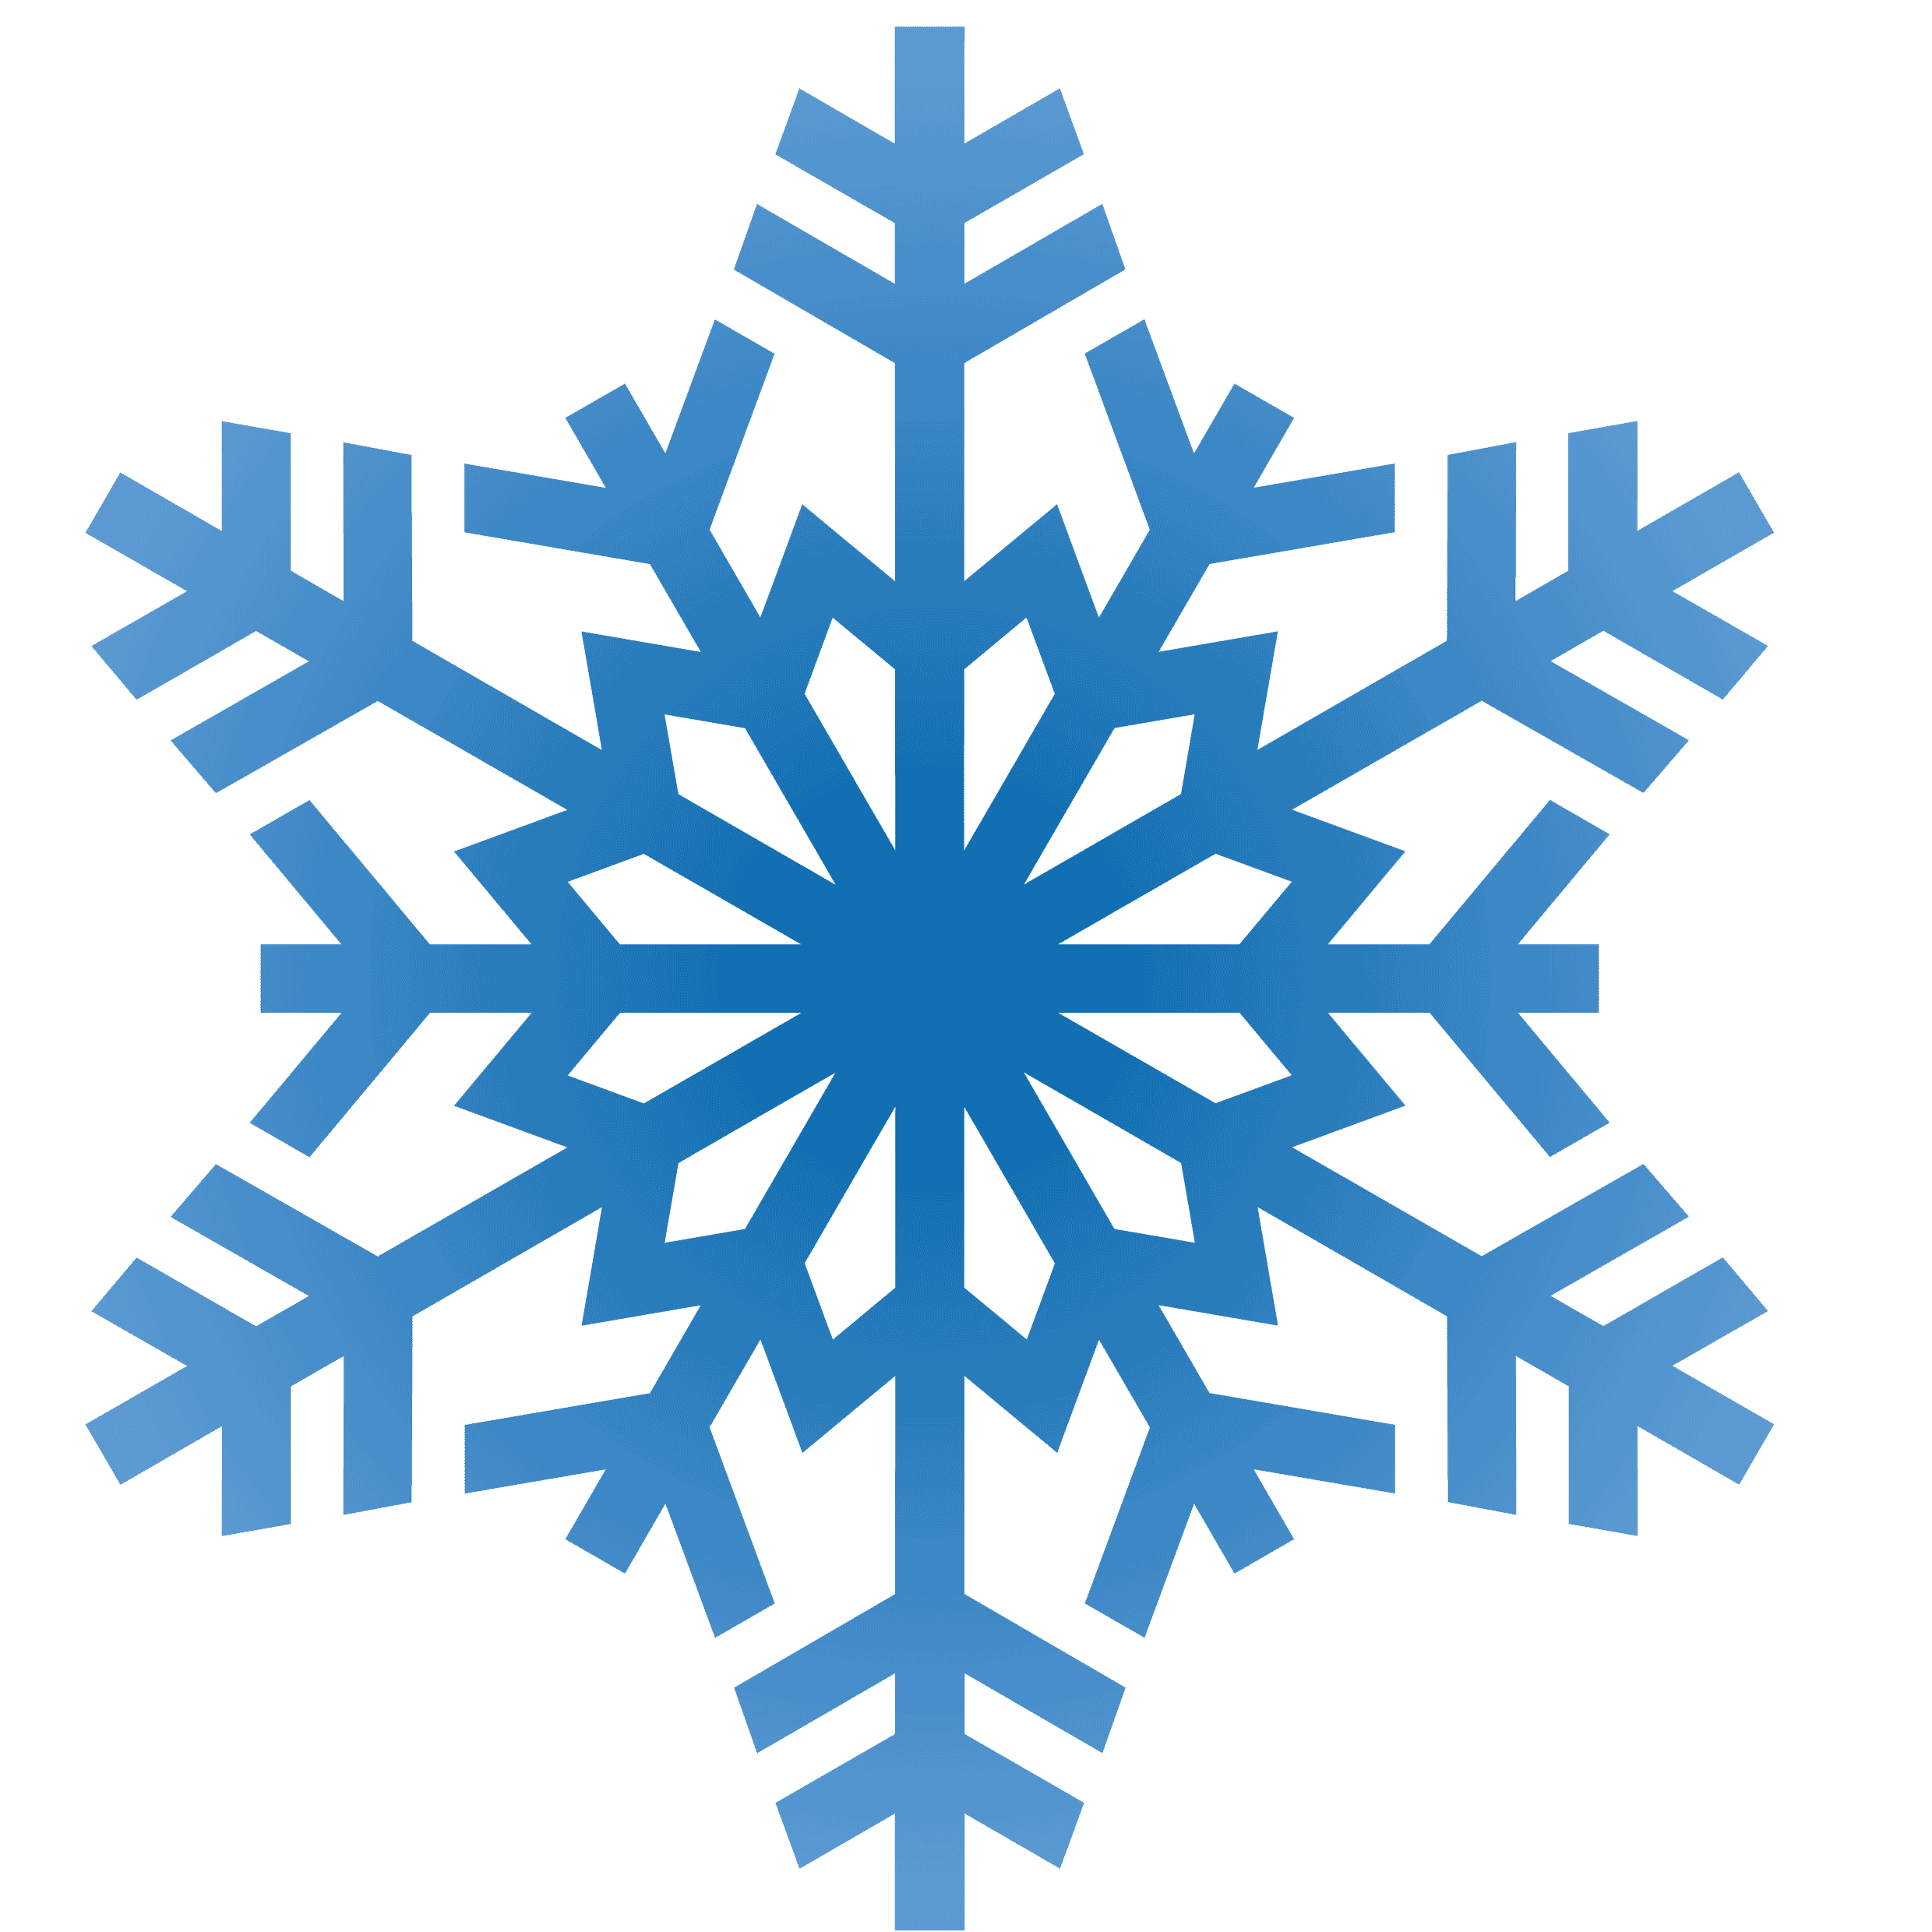 snowflake clipart without background - photo #16